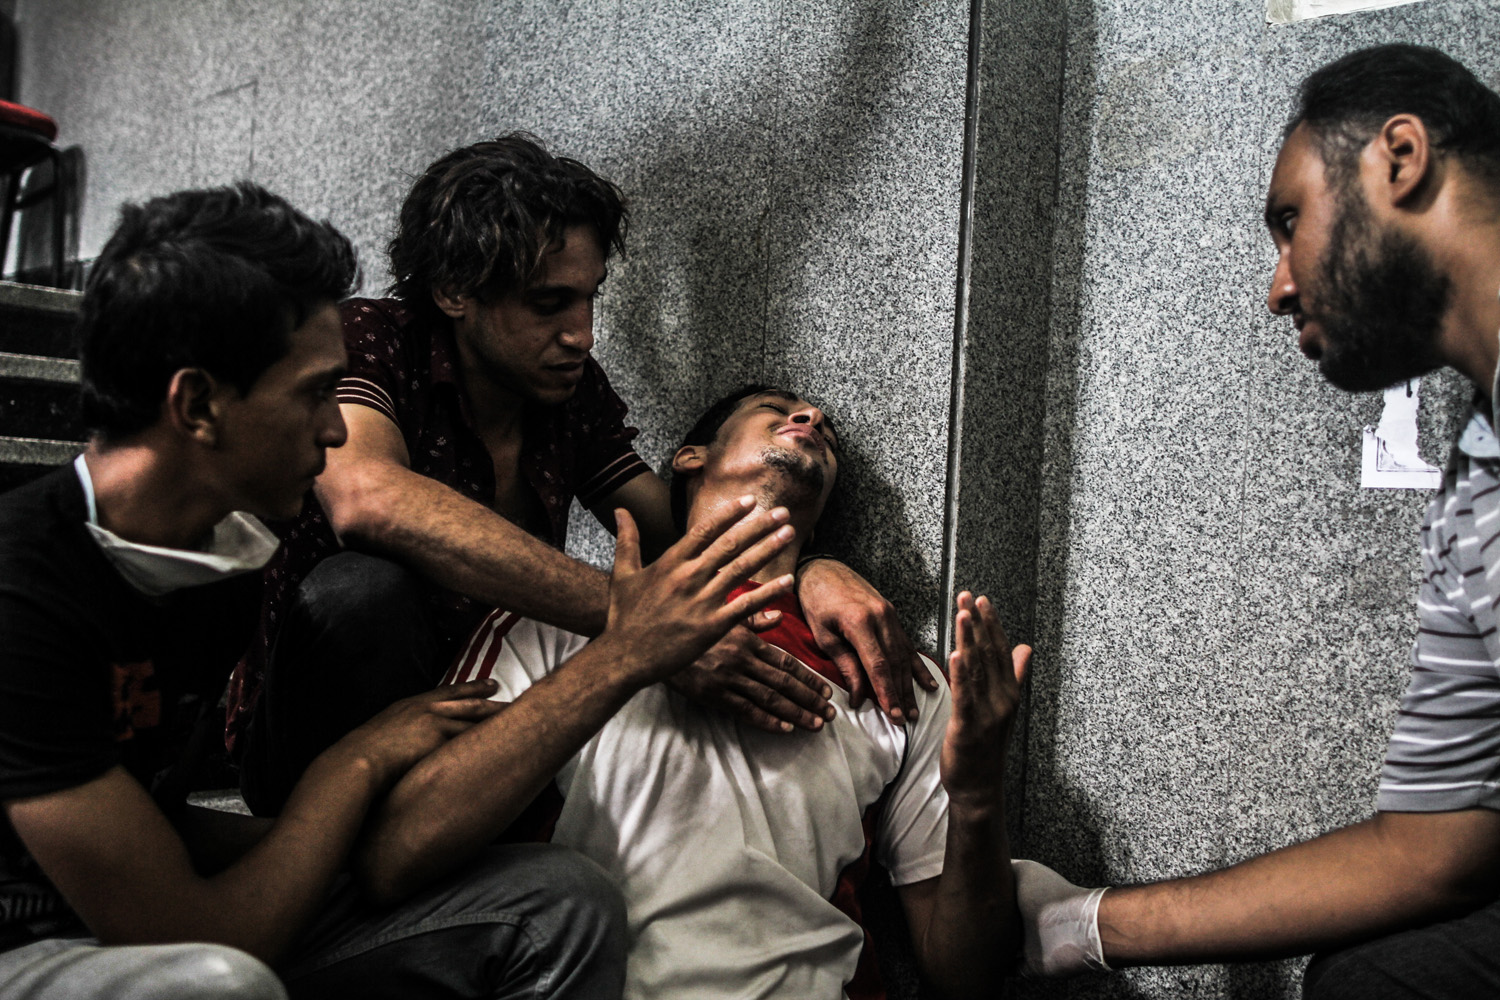 July 27, 2013. A brother of one of the victims is comforted by friends outside the room being used as a makeshift morgue.